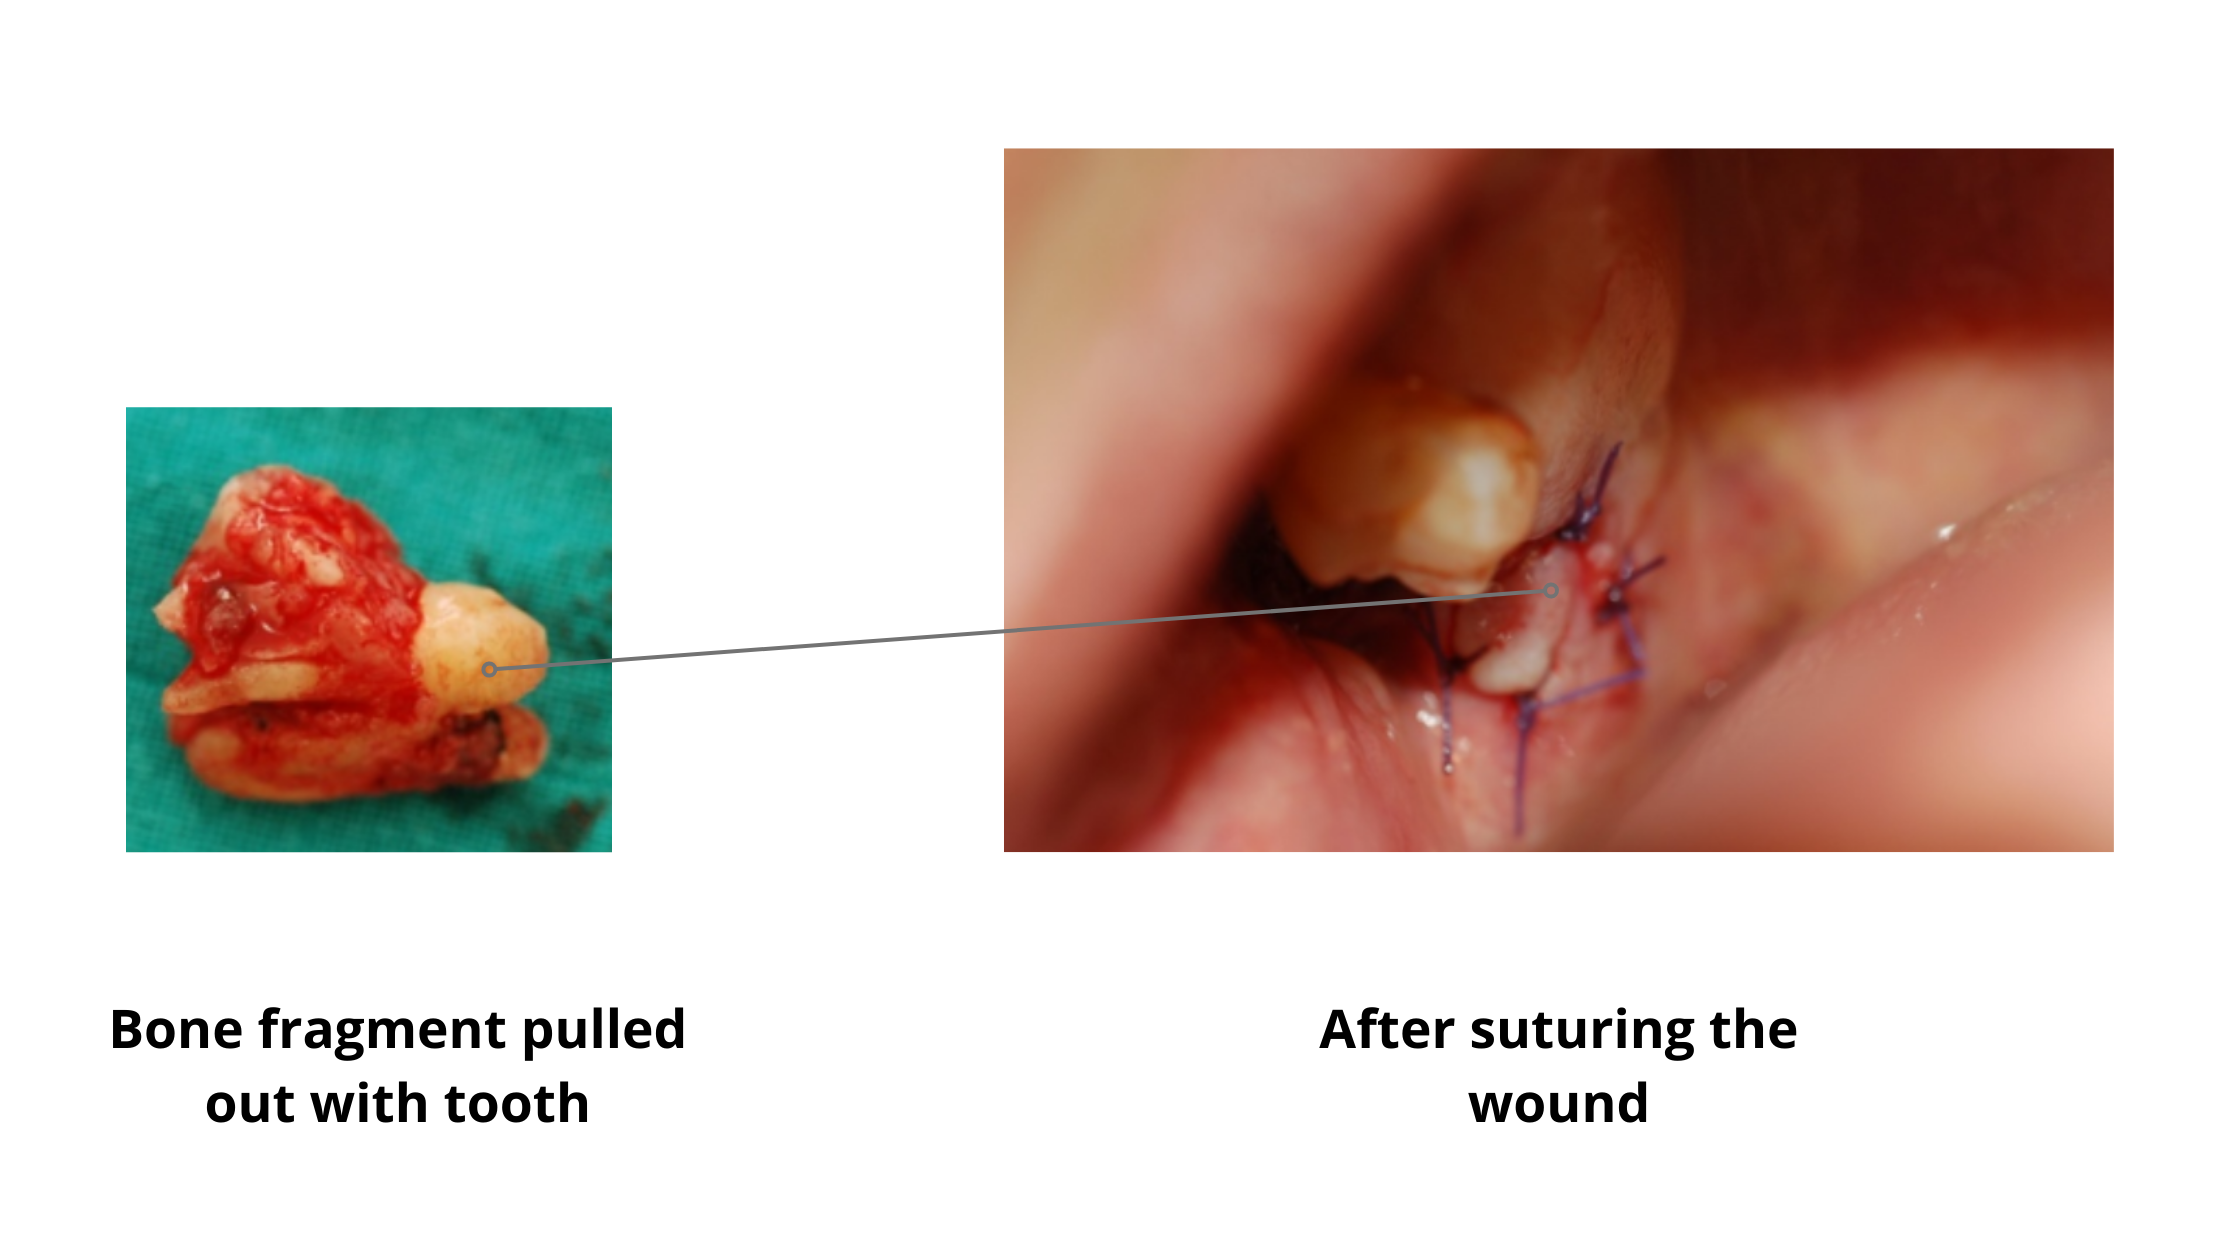 Treatment of intraoperative bone damage following wisdom tooth extraction